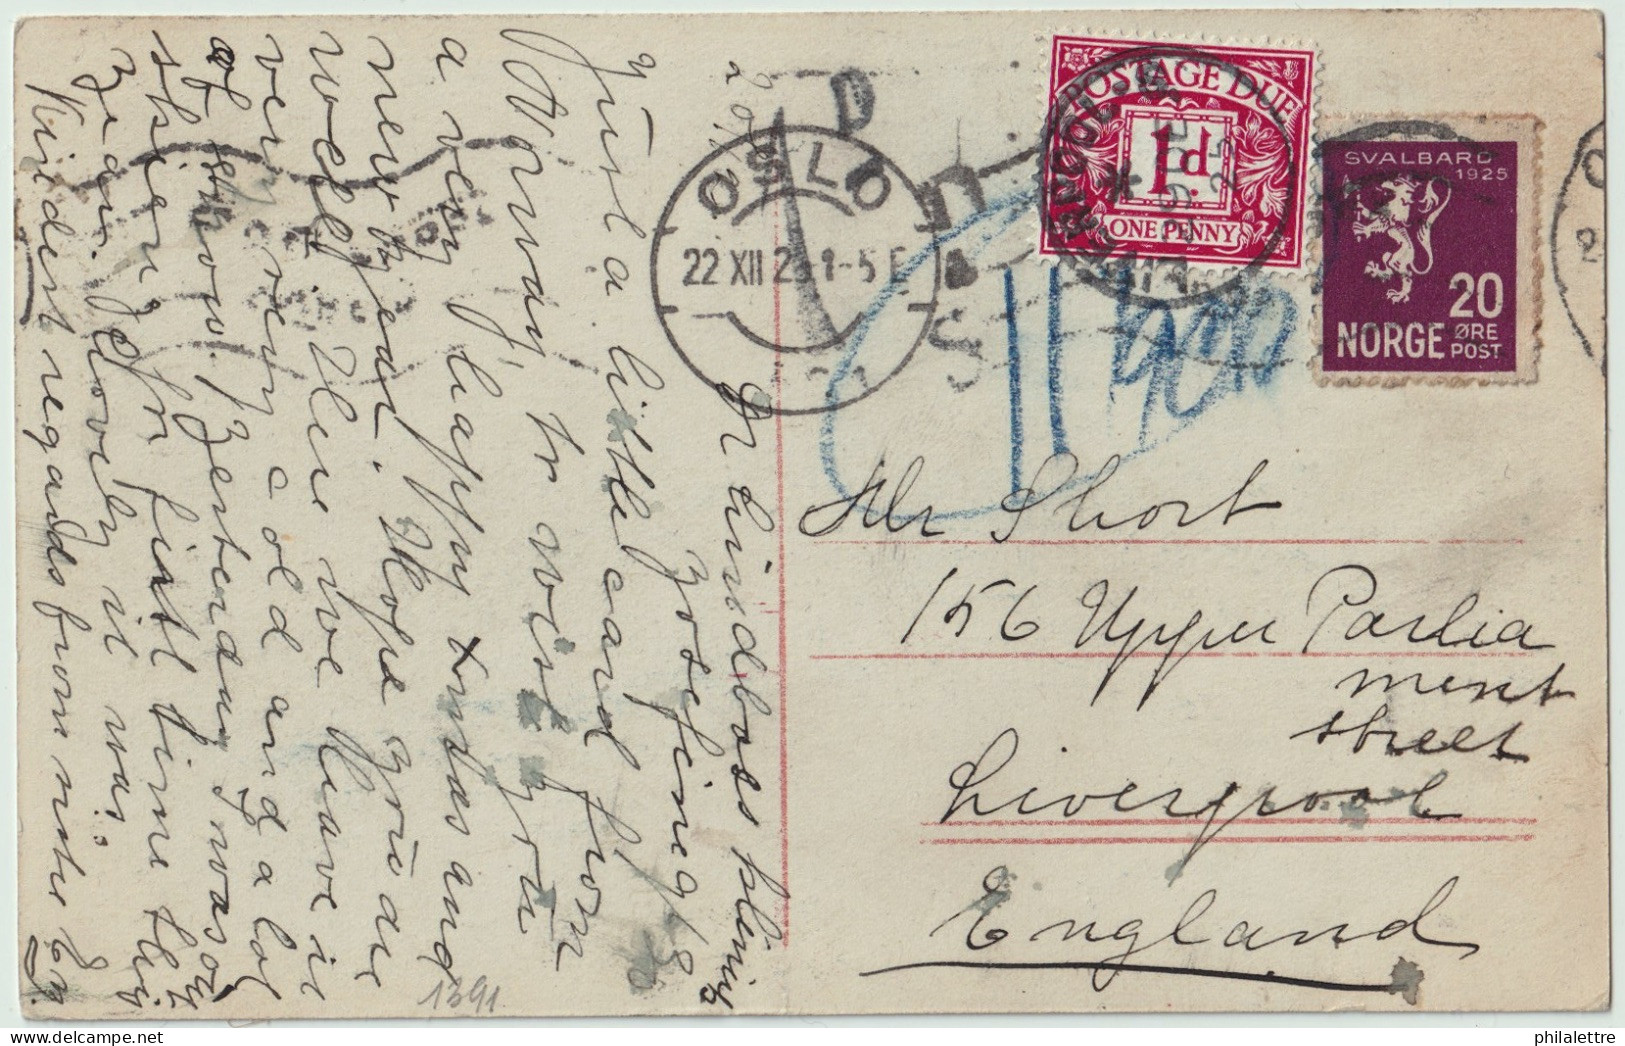 ROYAUME-UNI / UK - SG D11 On 1925 DENMARK To GB Underpaid Postage Due OSLO PPC To LIVERPOOL Franked 20 ör SVALBARD Issue - Portomarken